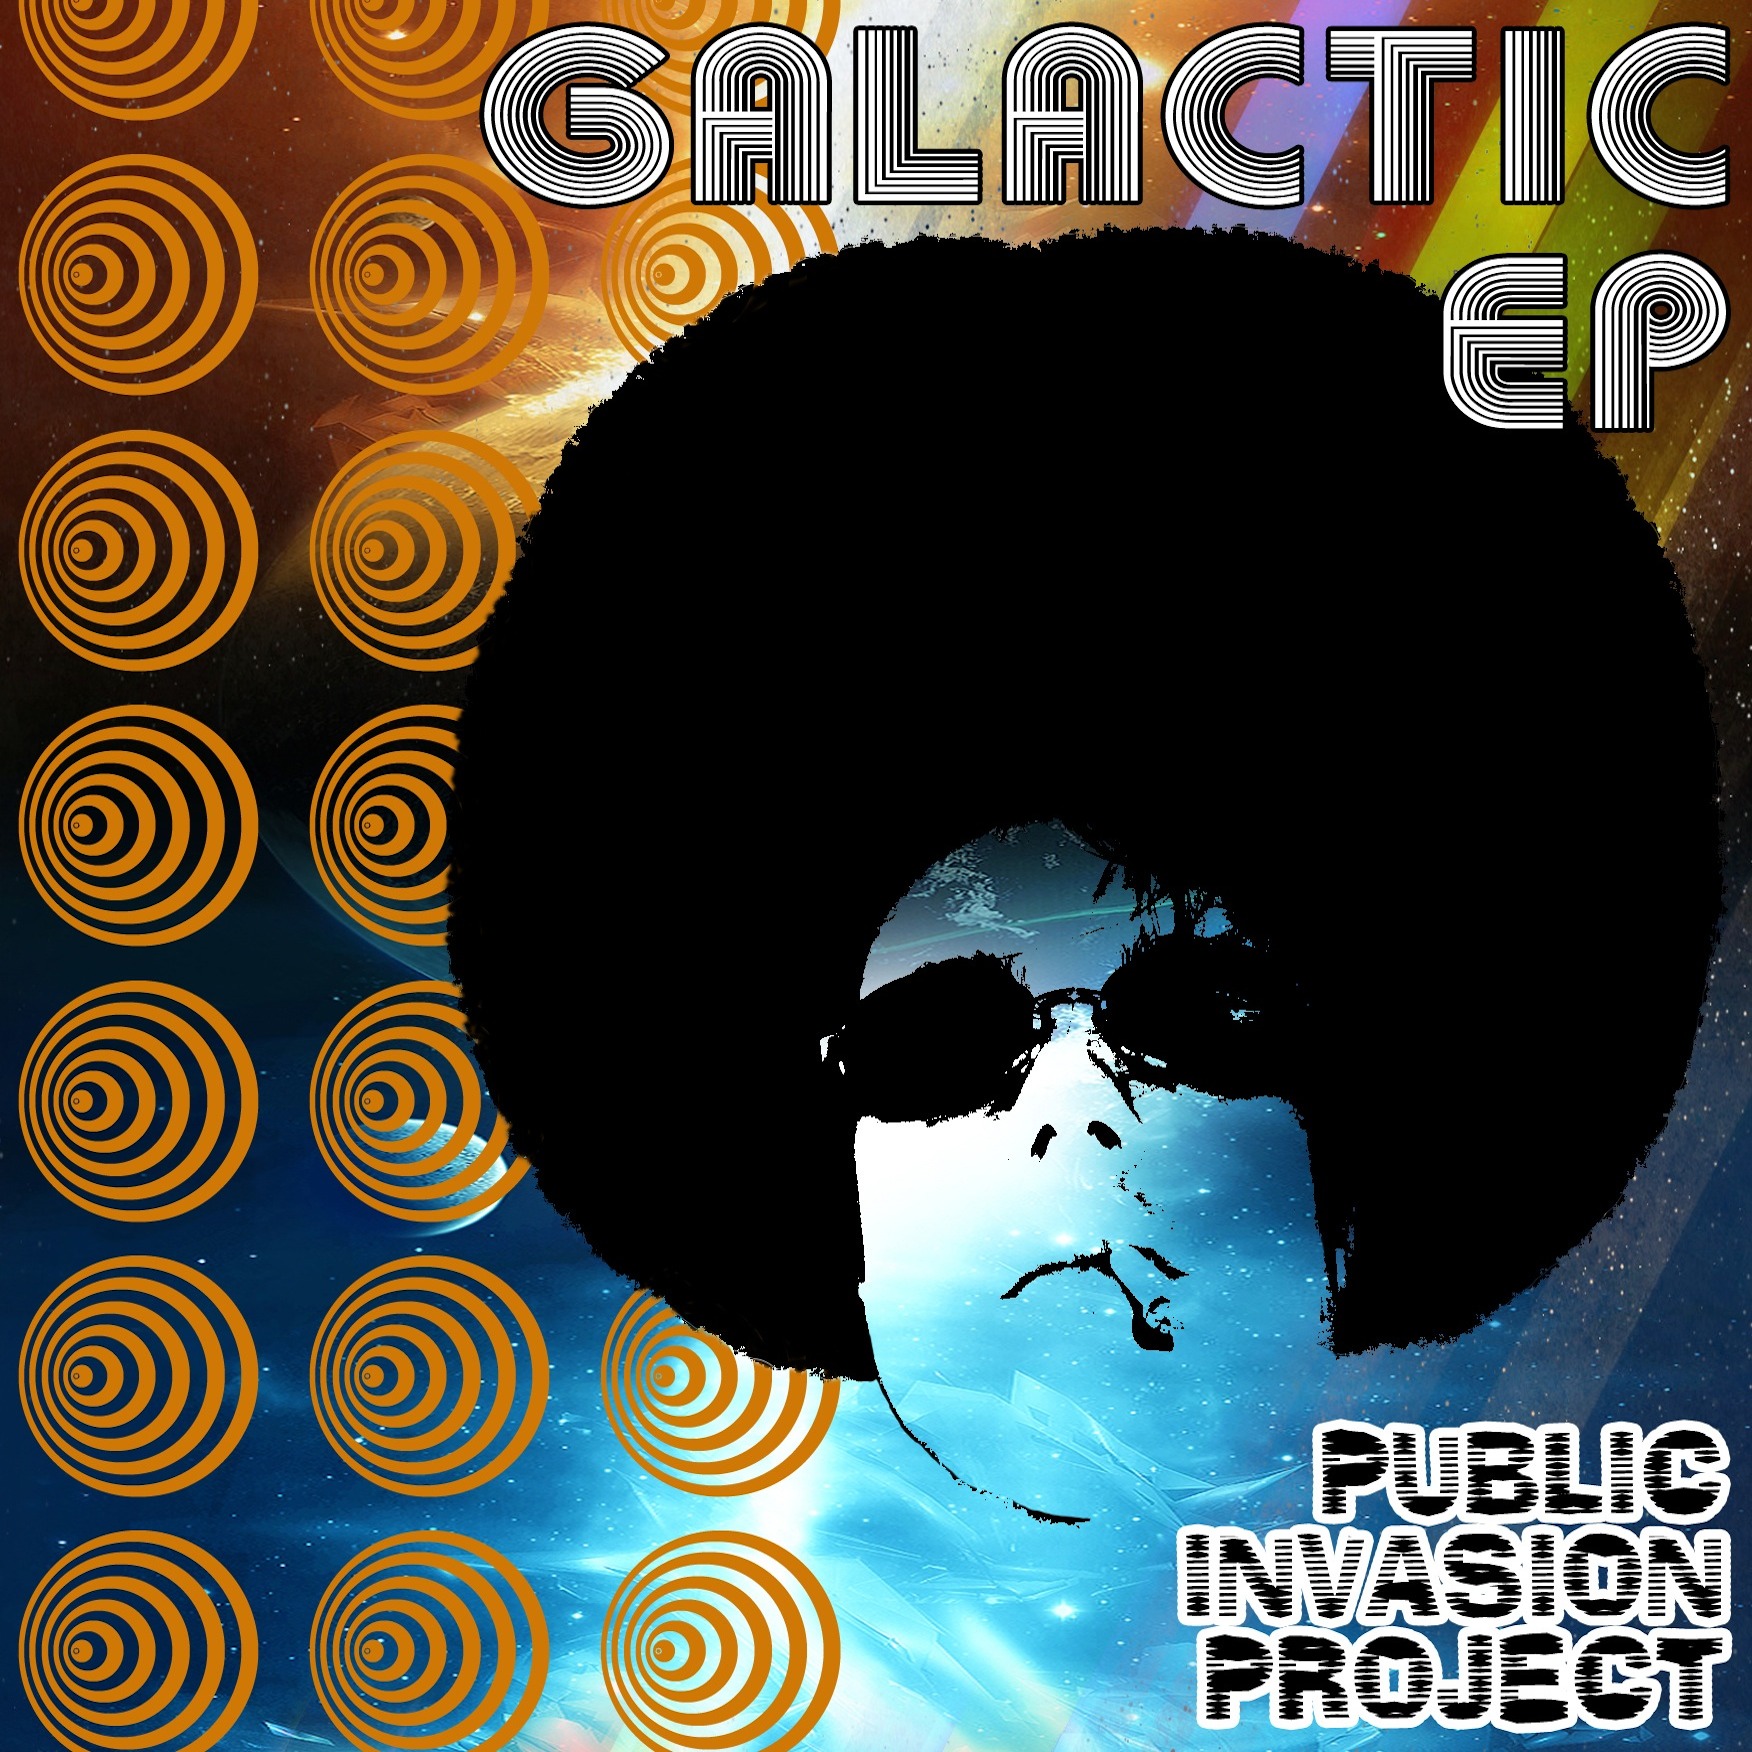 Public Invasion Project - Galactic EP